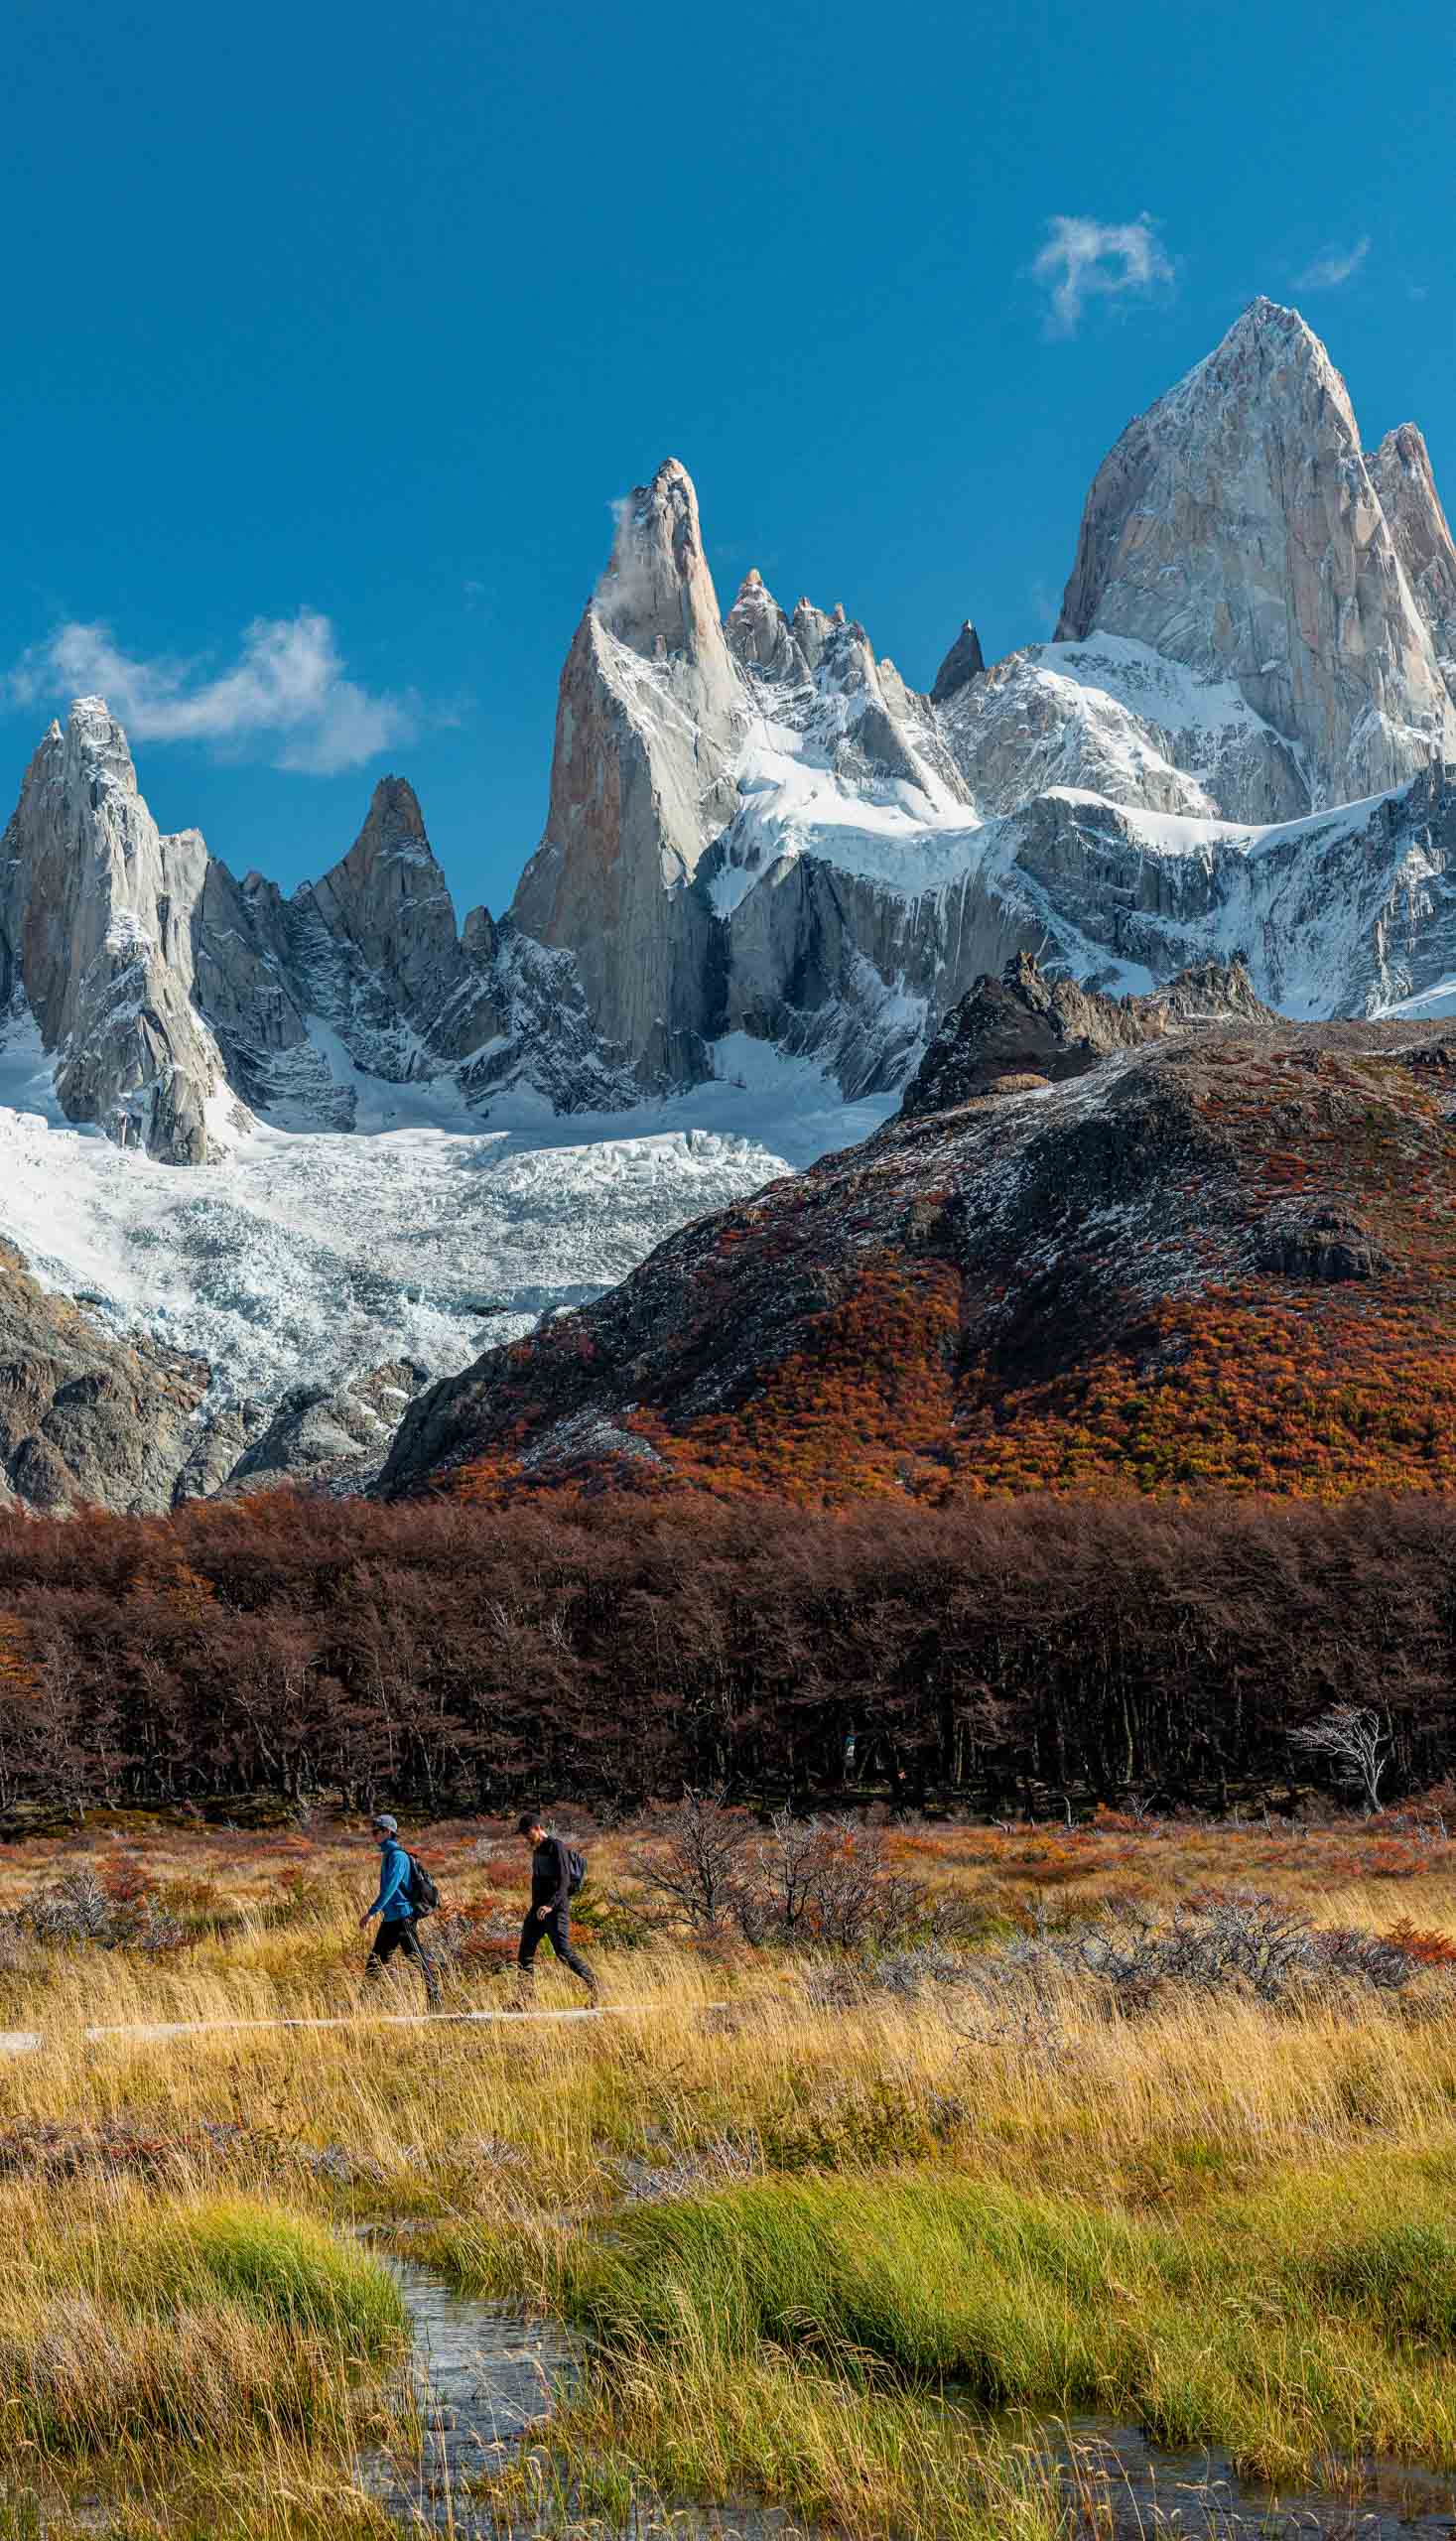 A group of people hiking by Mt. Fitz Roy.